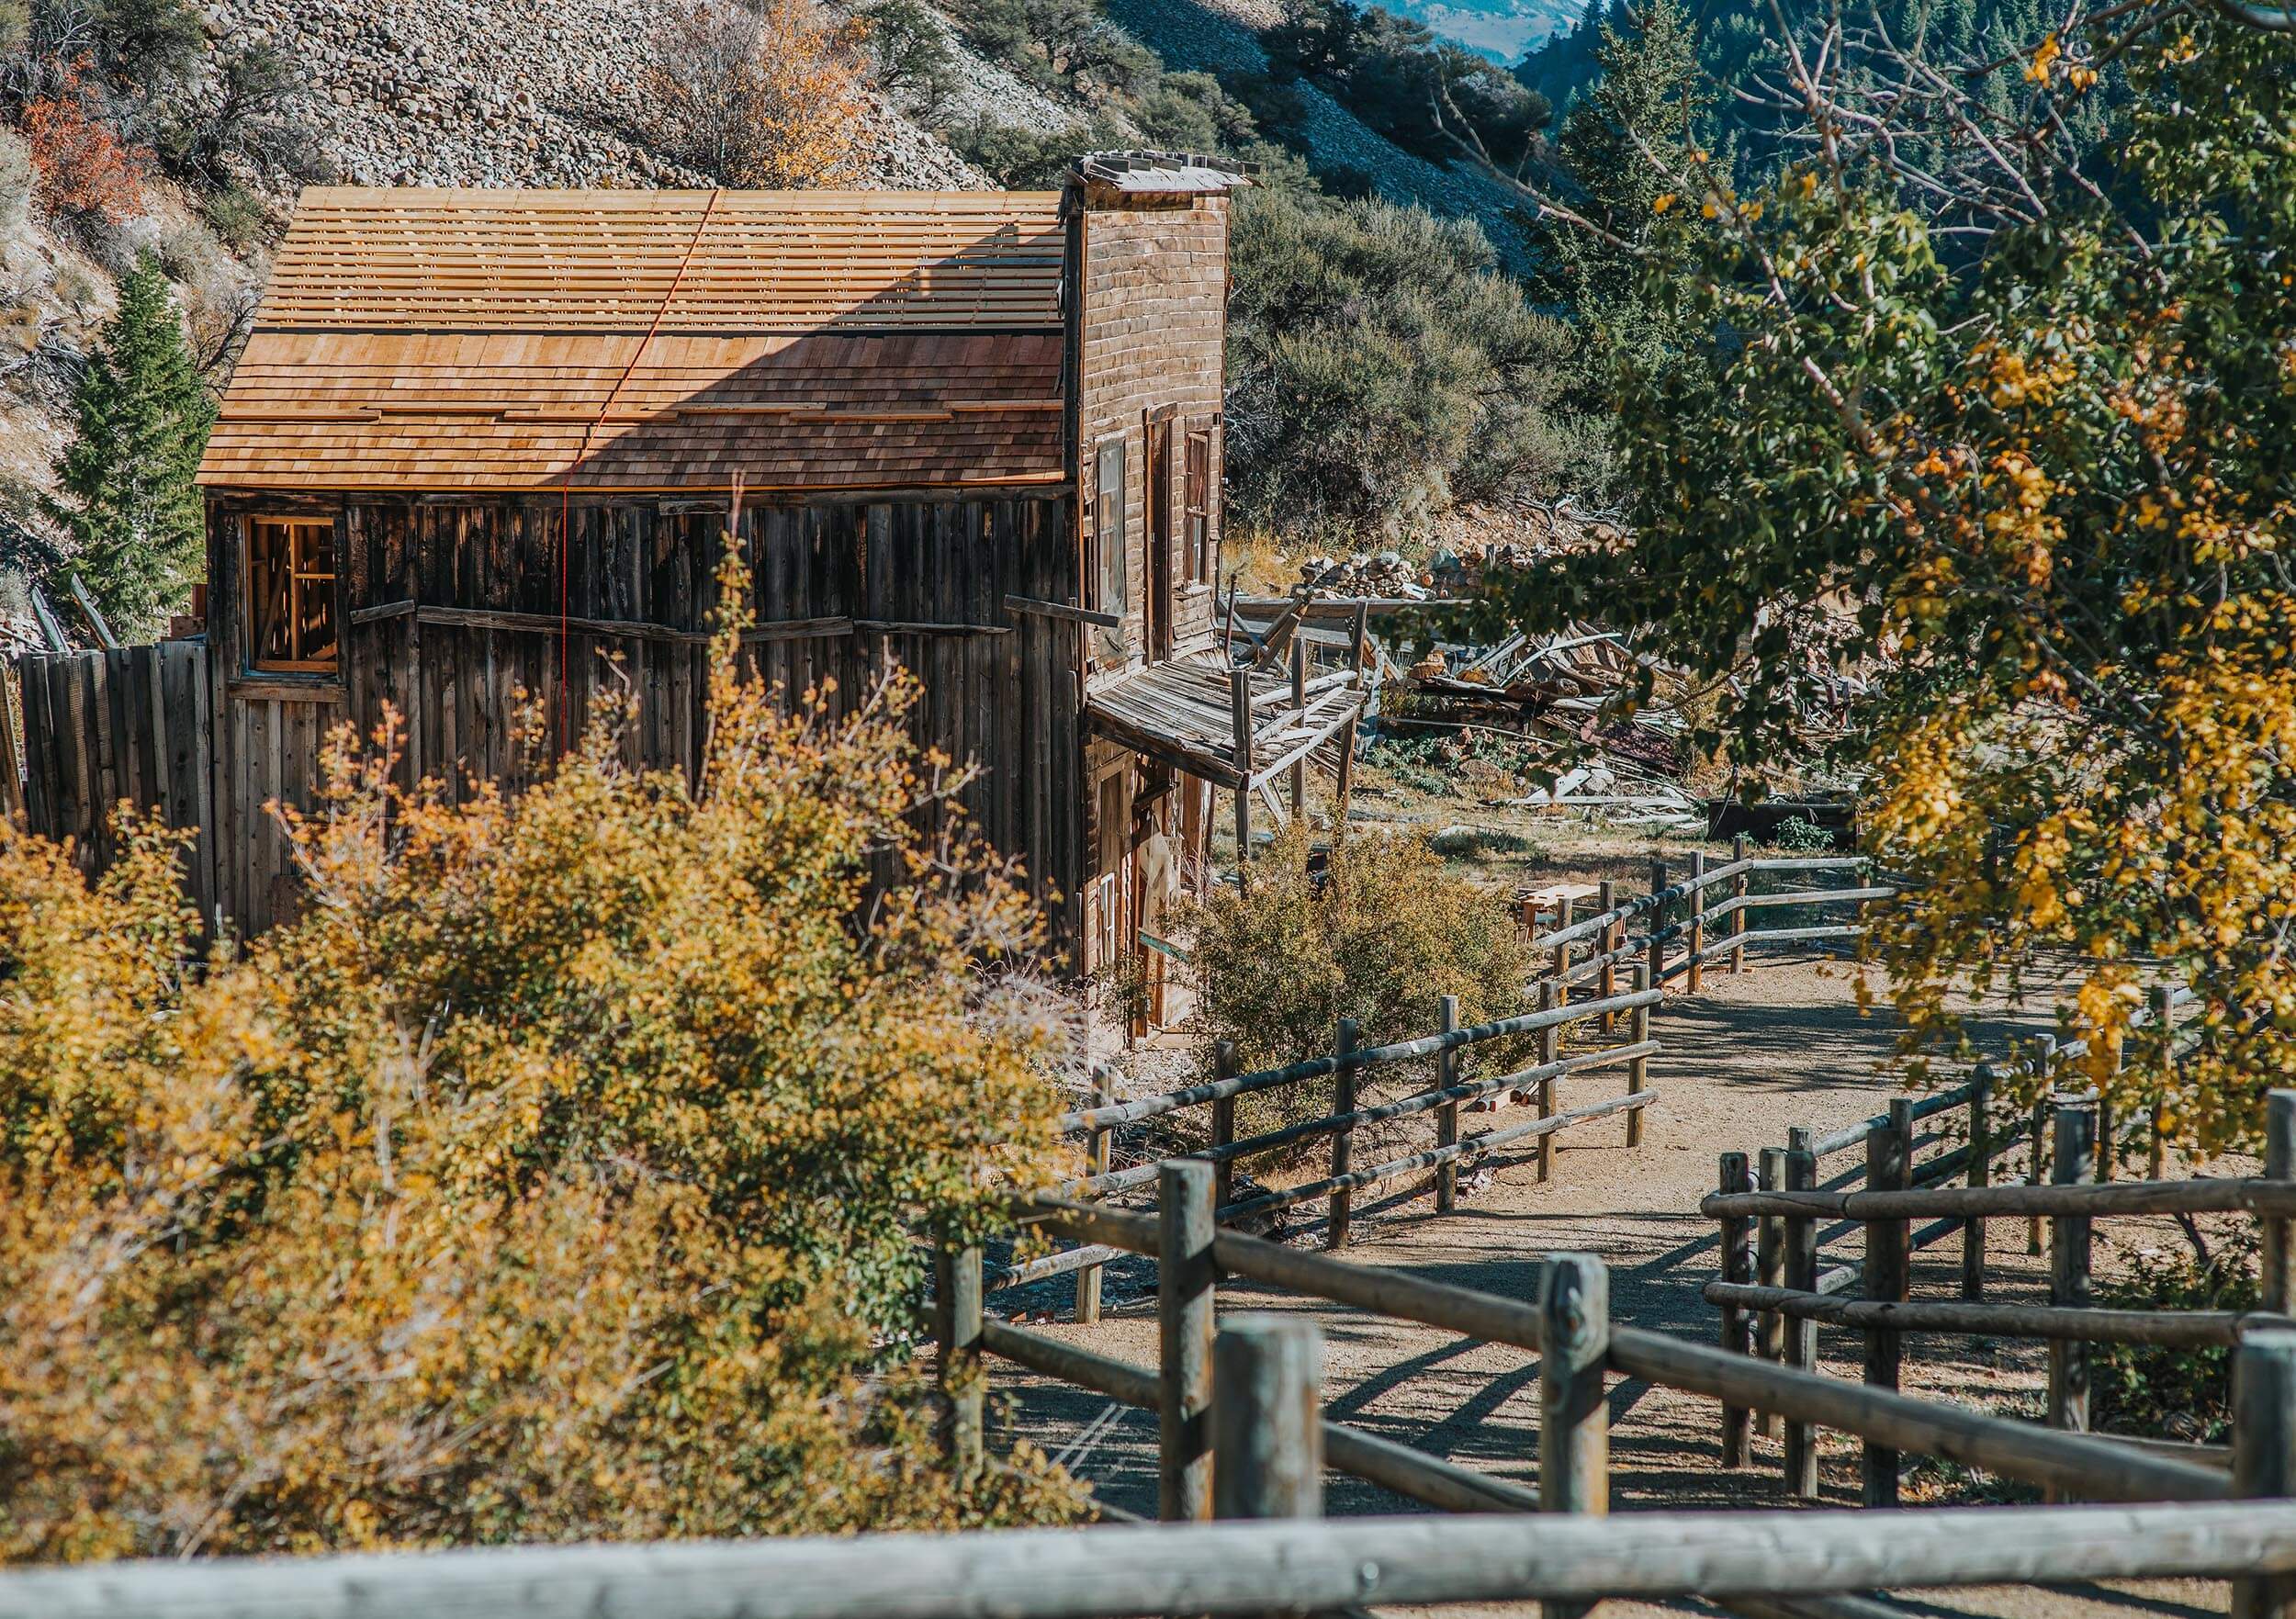 An old wooden and brick building beside a dirt path lined with fencing, surrounded by trees at Bayhorse Ghost Town.